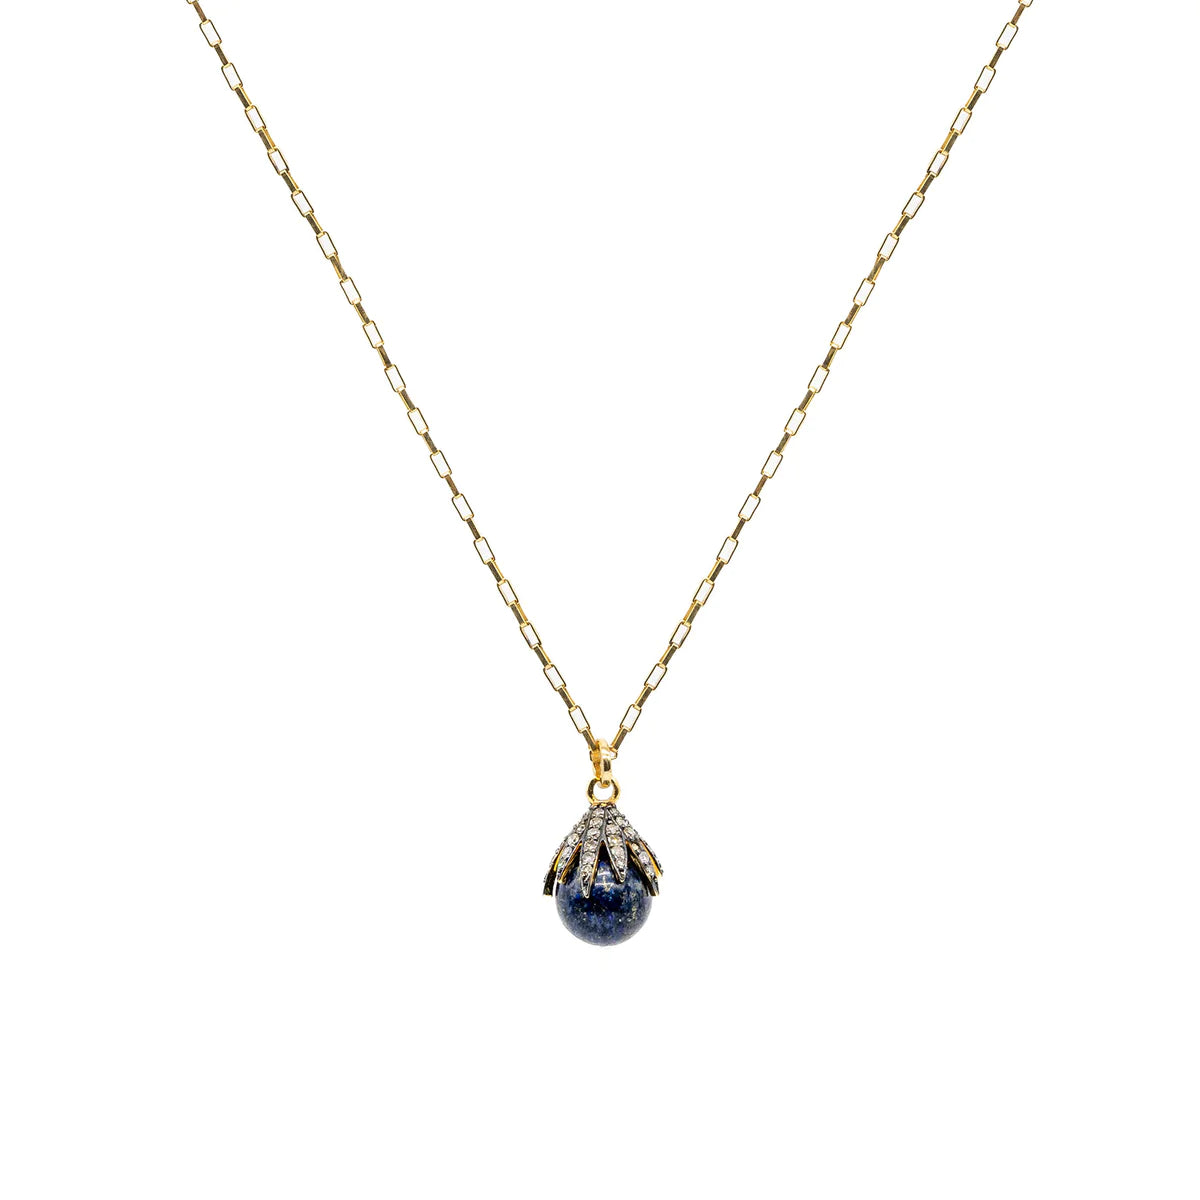 Lapis Lazuli pendant necklace with pave diamond claw setting on a gold plated chain